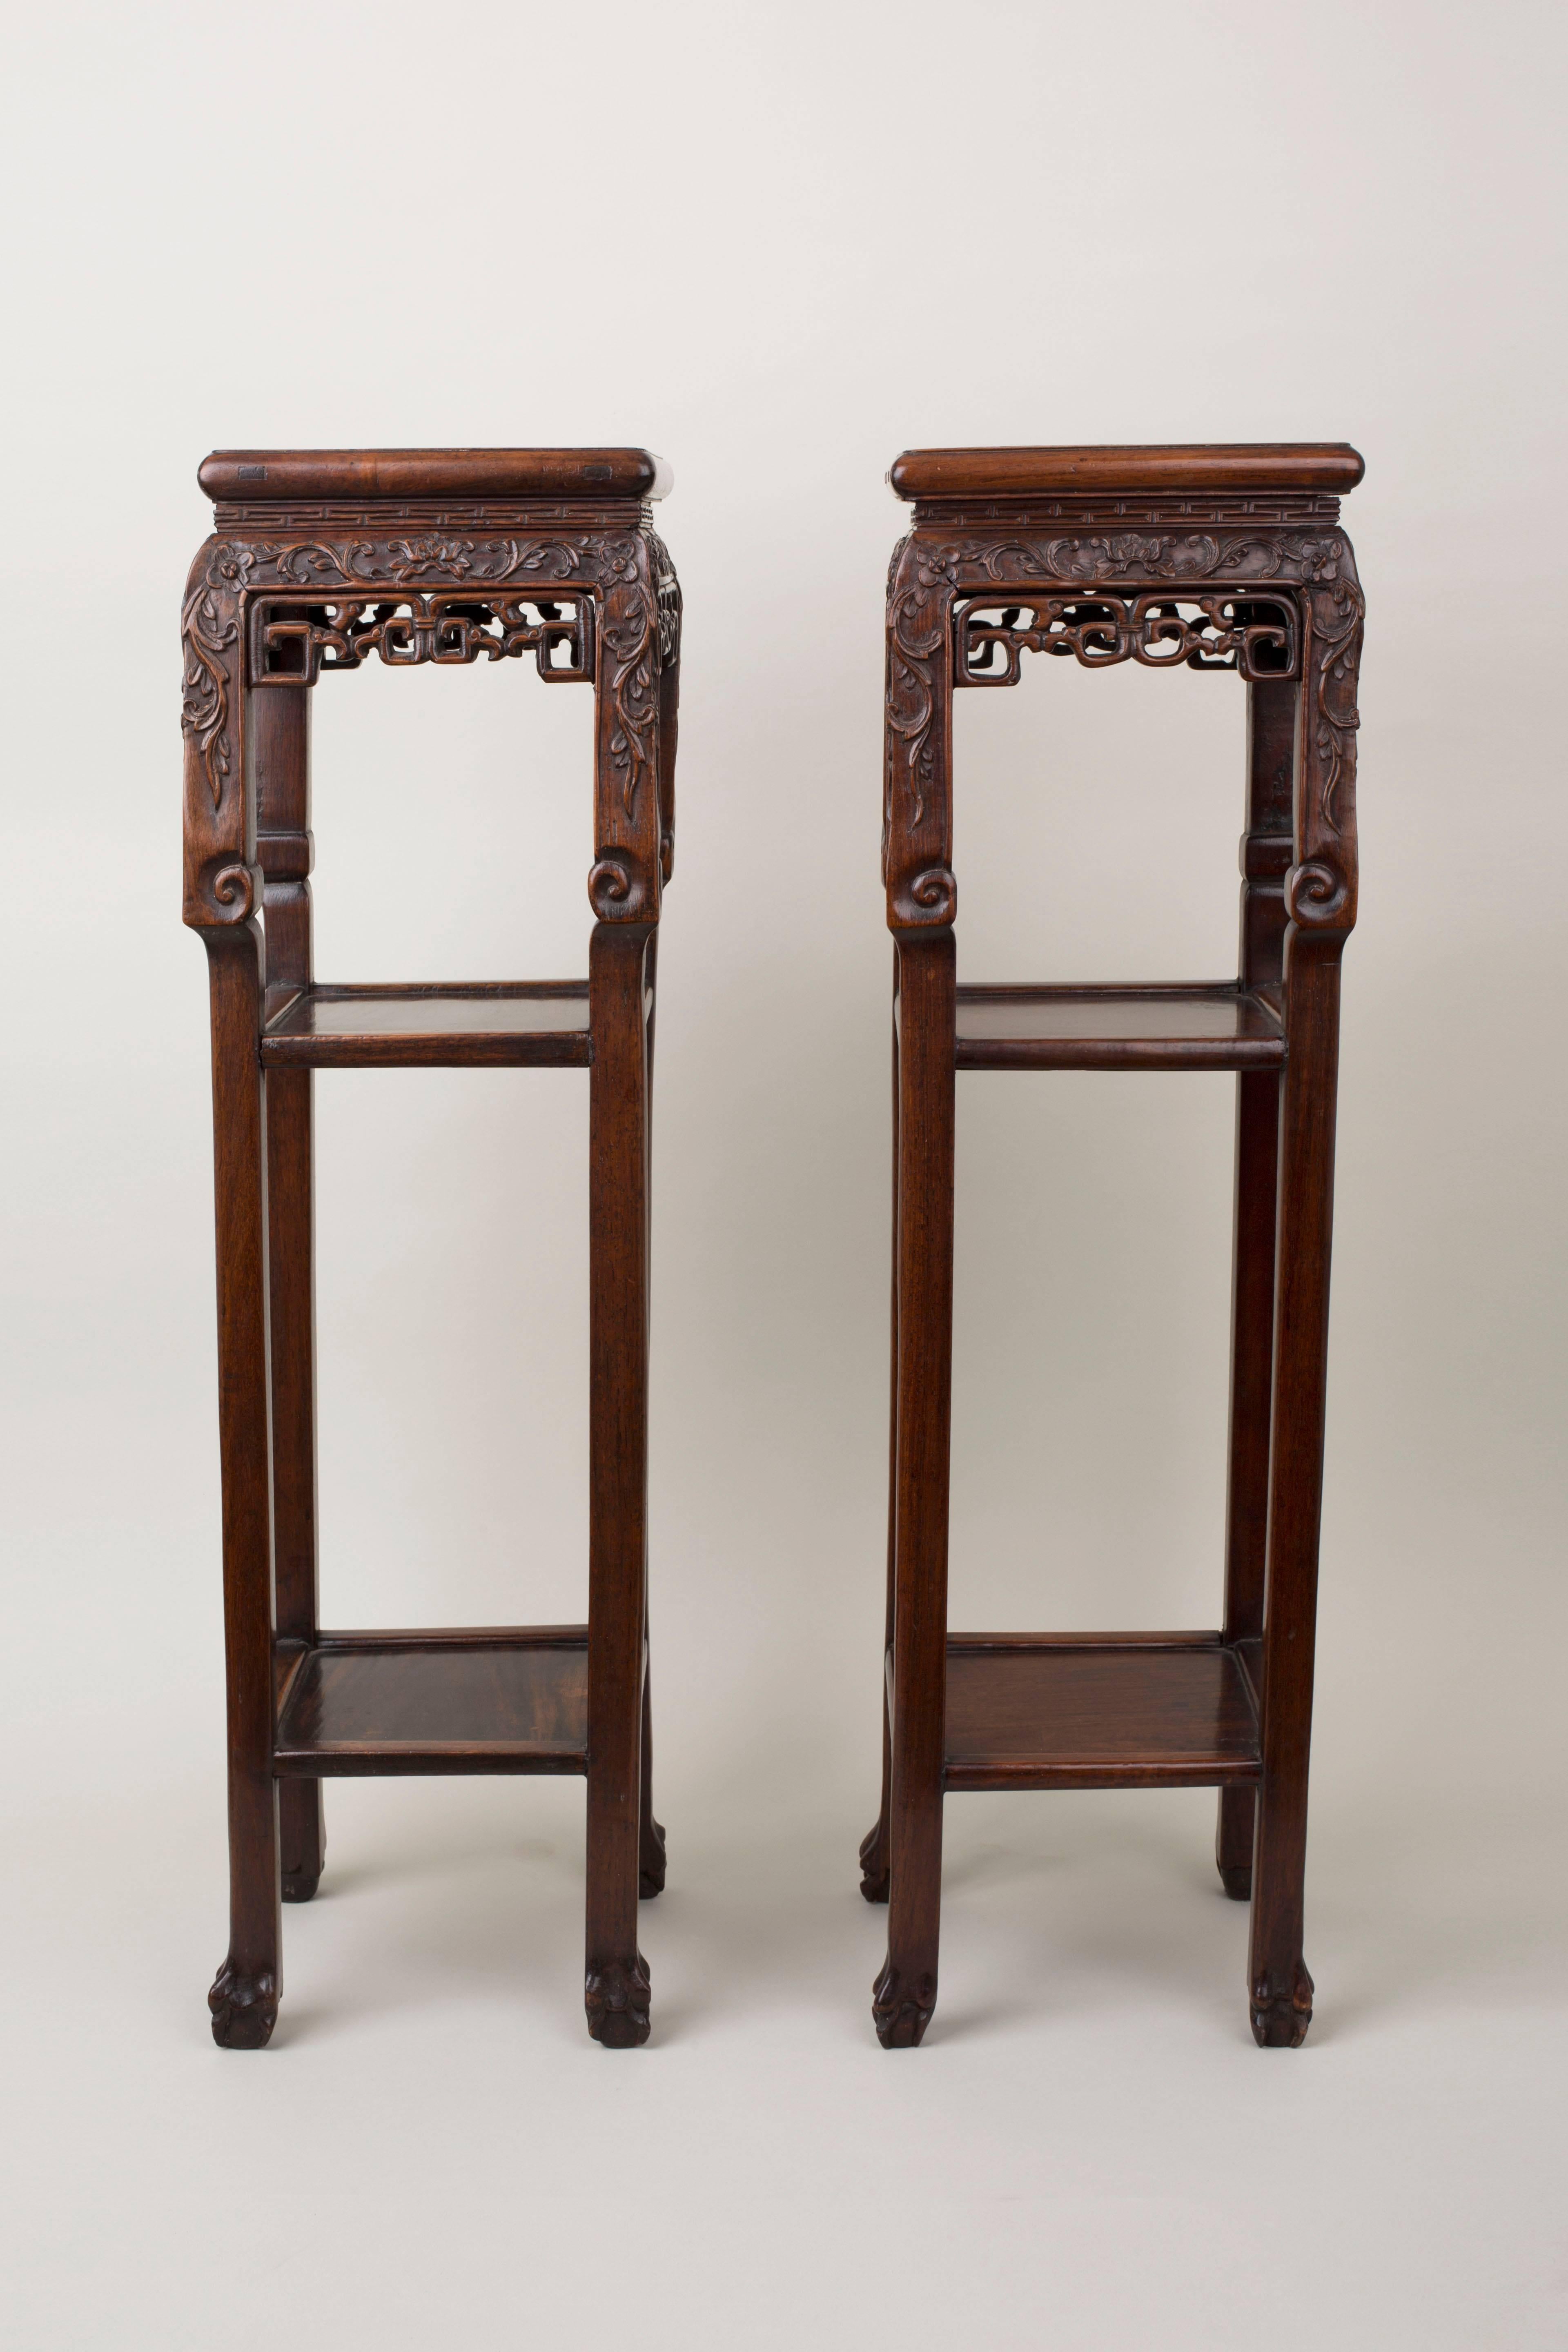 A pair of Chinese black wood hong mu square pedestal tables, the top inset with mottled red and white marble, the frieze carved in relief with flowers and scrolling foliage extending down the square legs which terminate above a low shelf into scroll